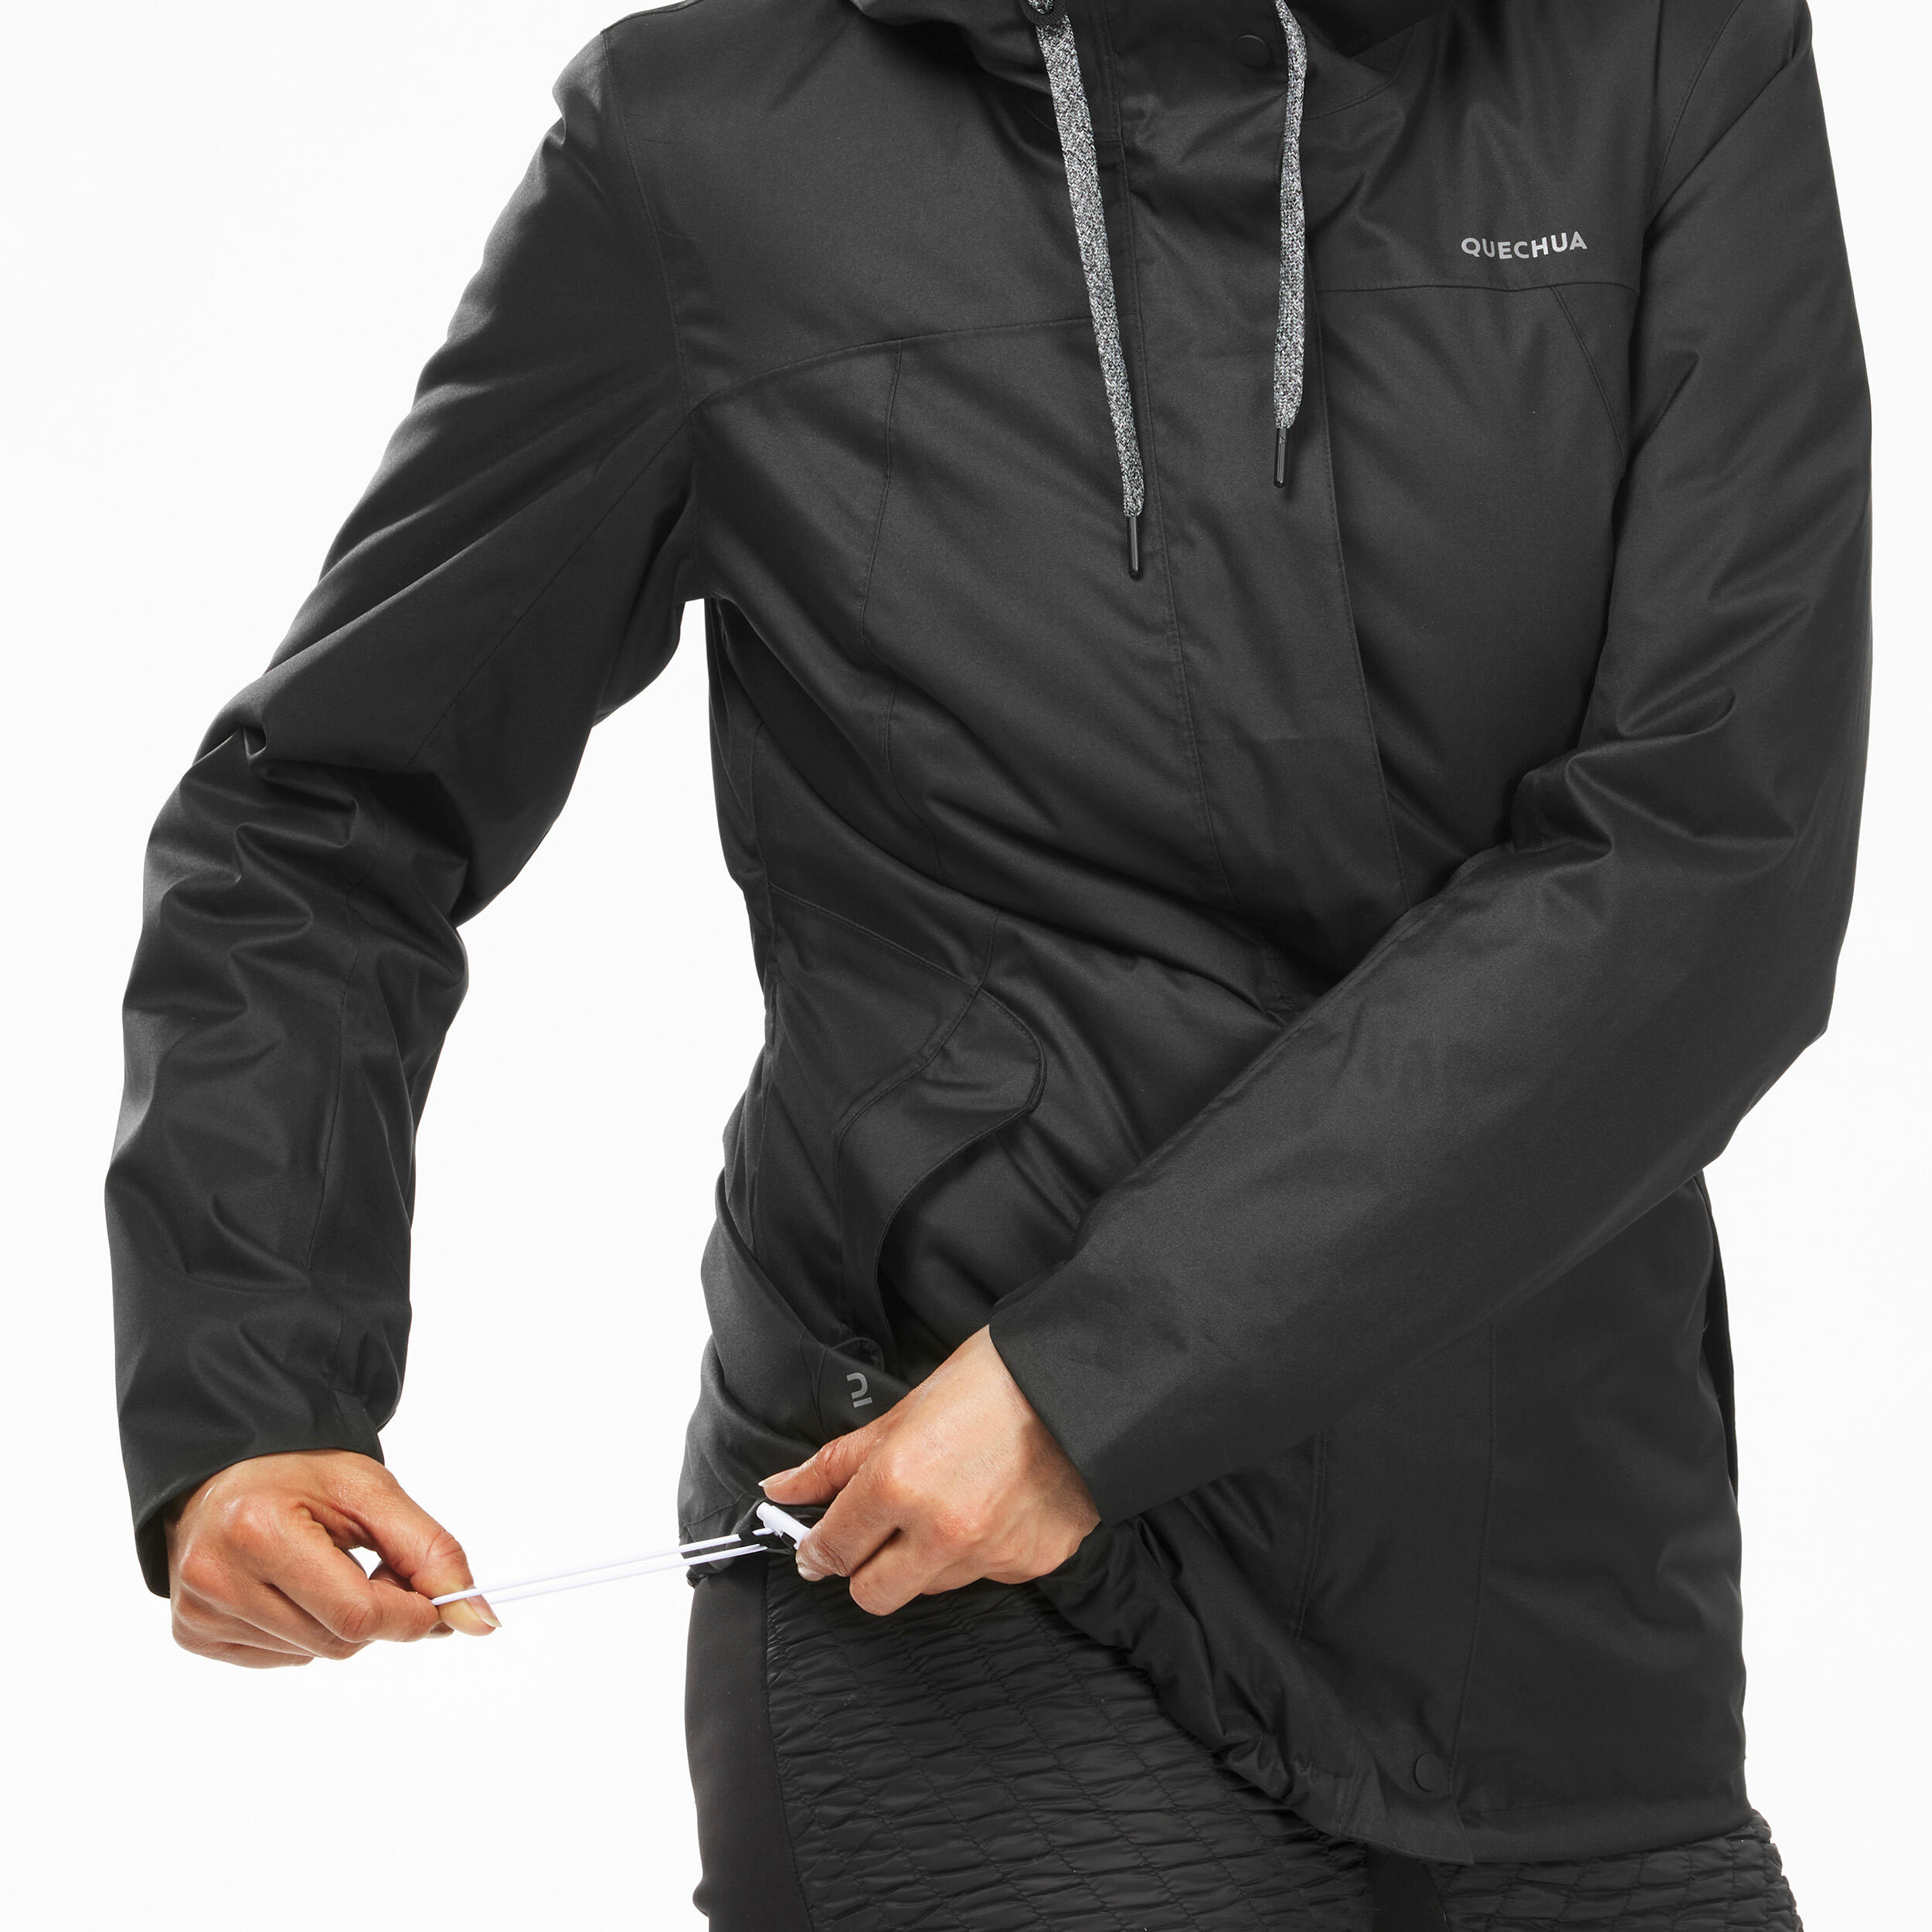 Quechua By Decathlon Jackets Price in India | Jackets Price List in India -  DTashion.com